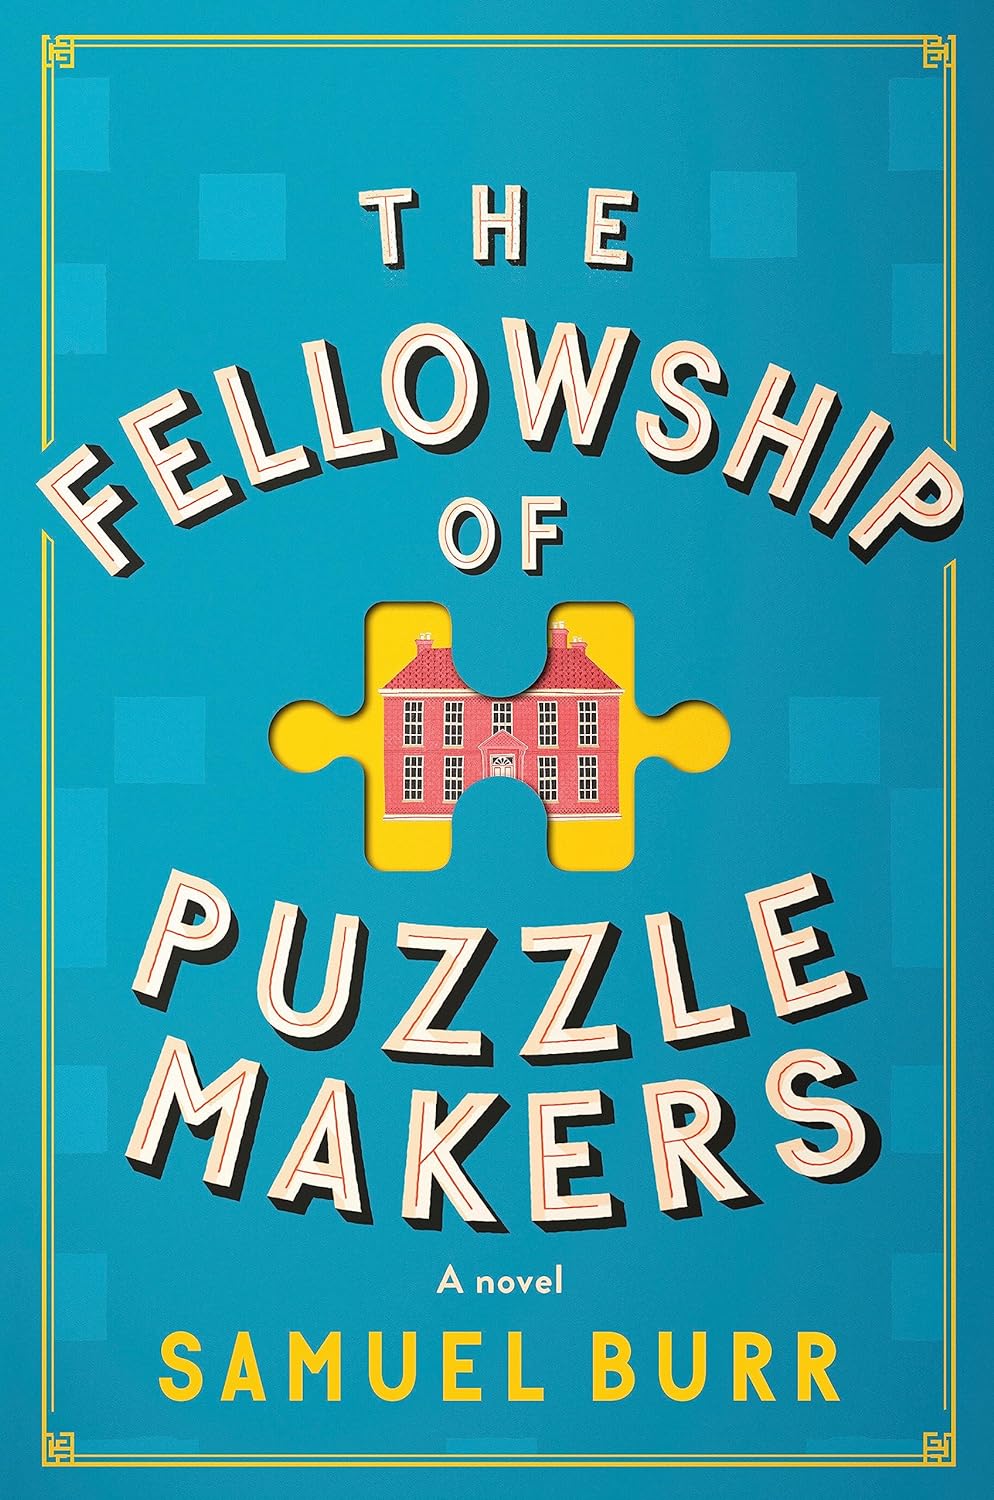 Image for "The Fellowship of Puzzlemakers"